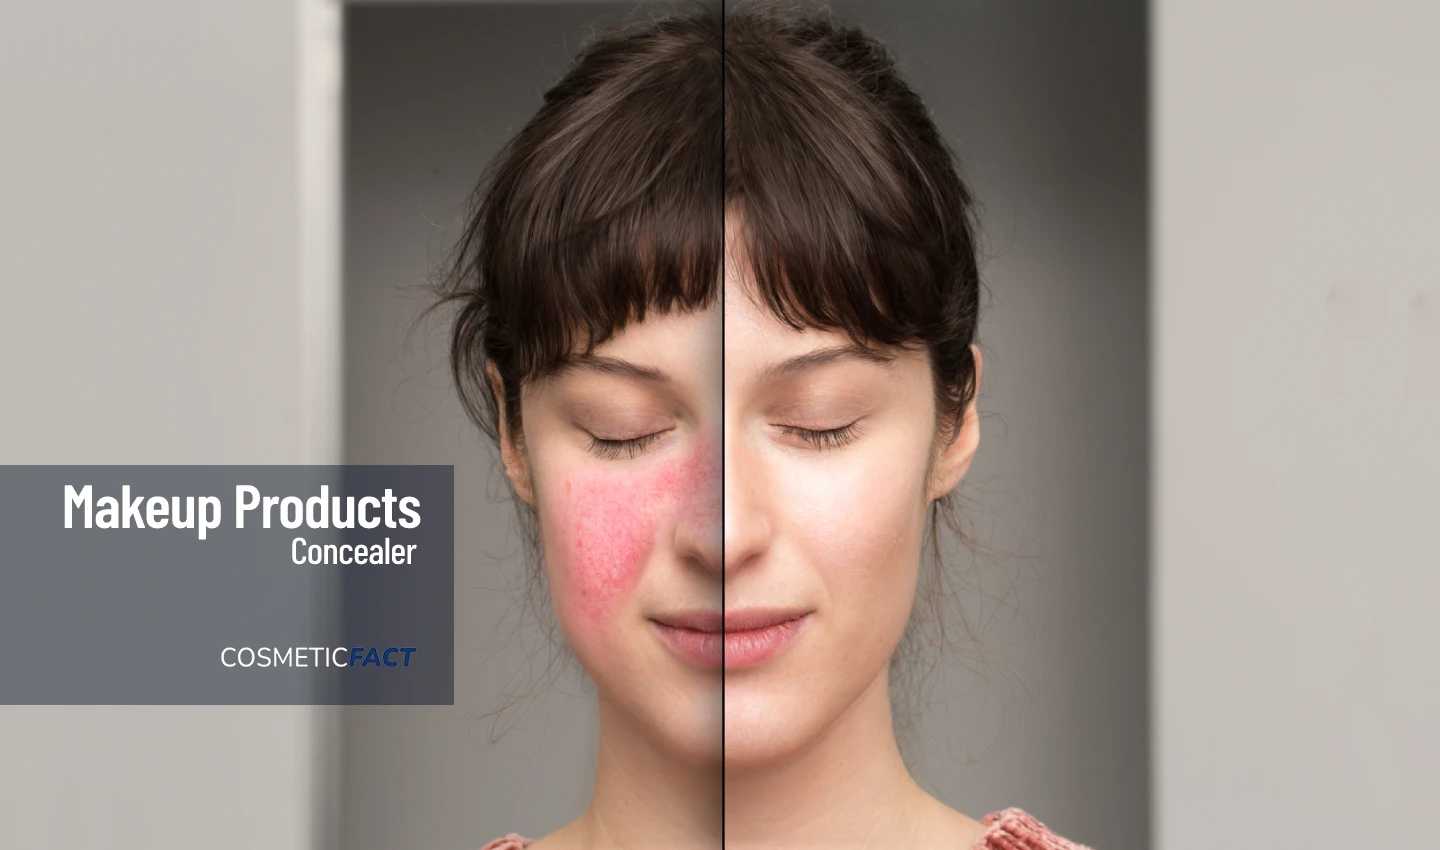 Image of a woman with half her face with a big red spot and the other half covered with concealer, showcasing the effectiveness of acne-prone skin concealers.